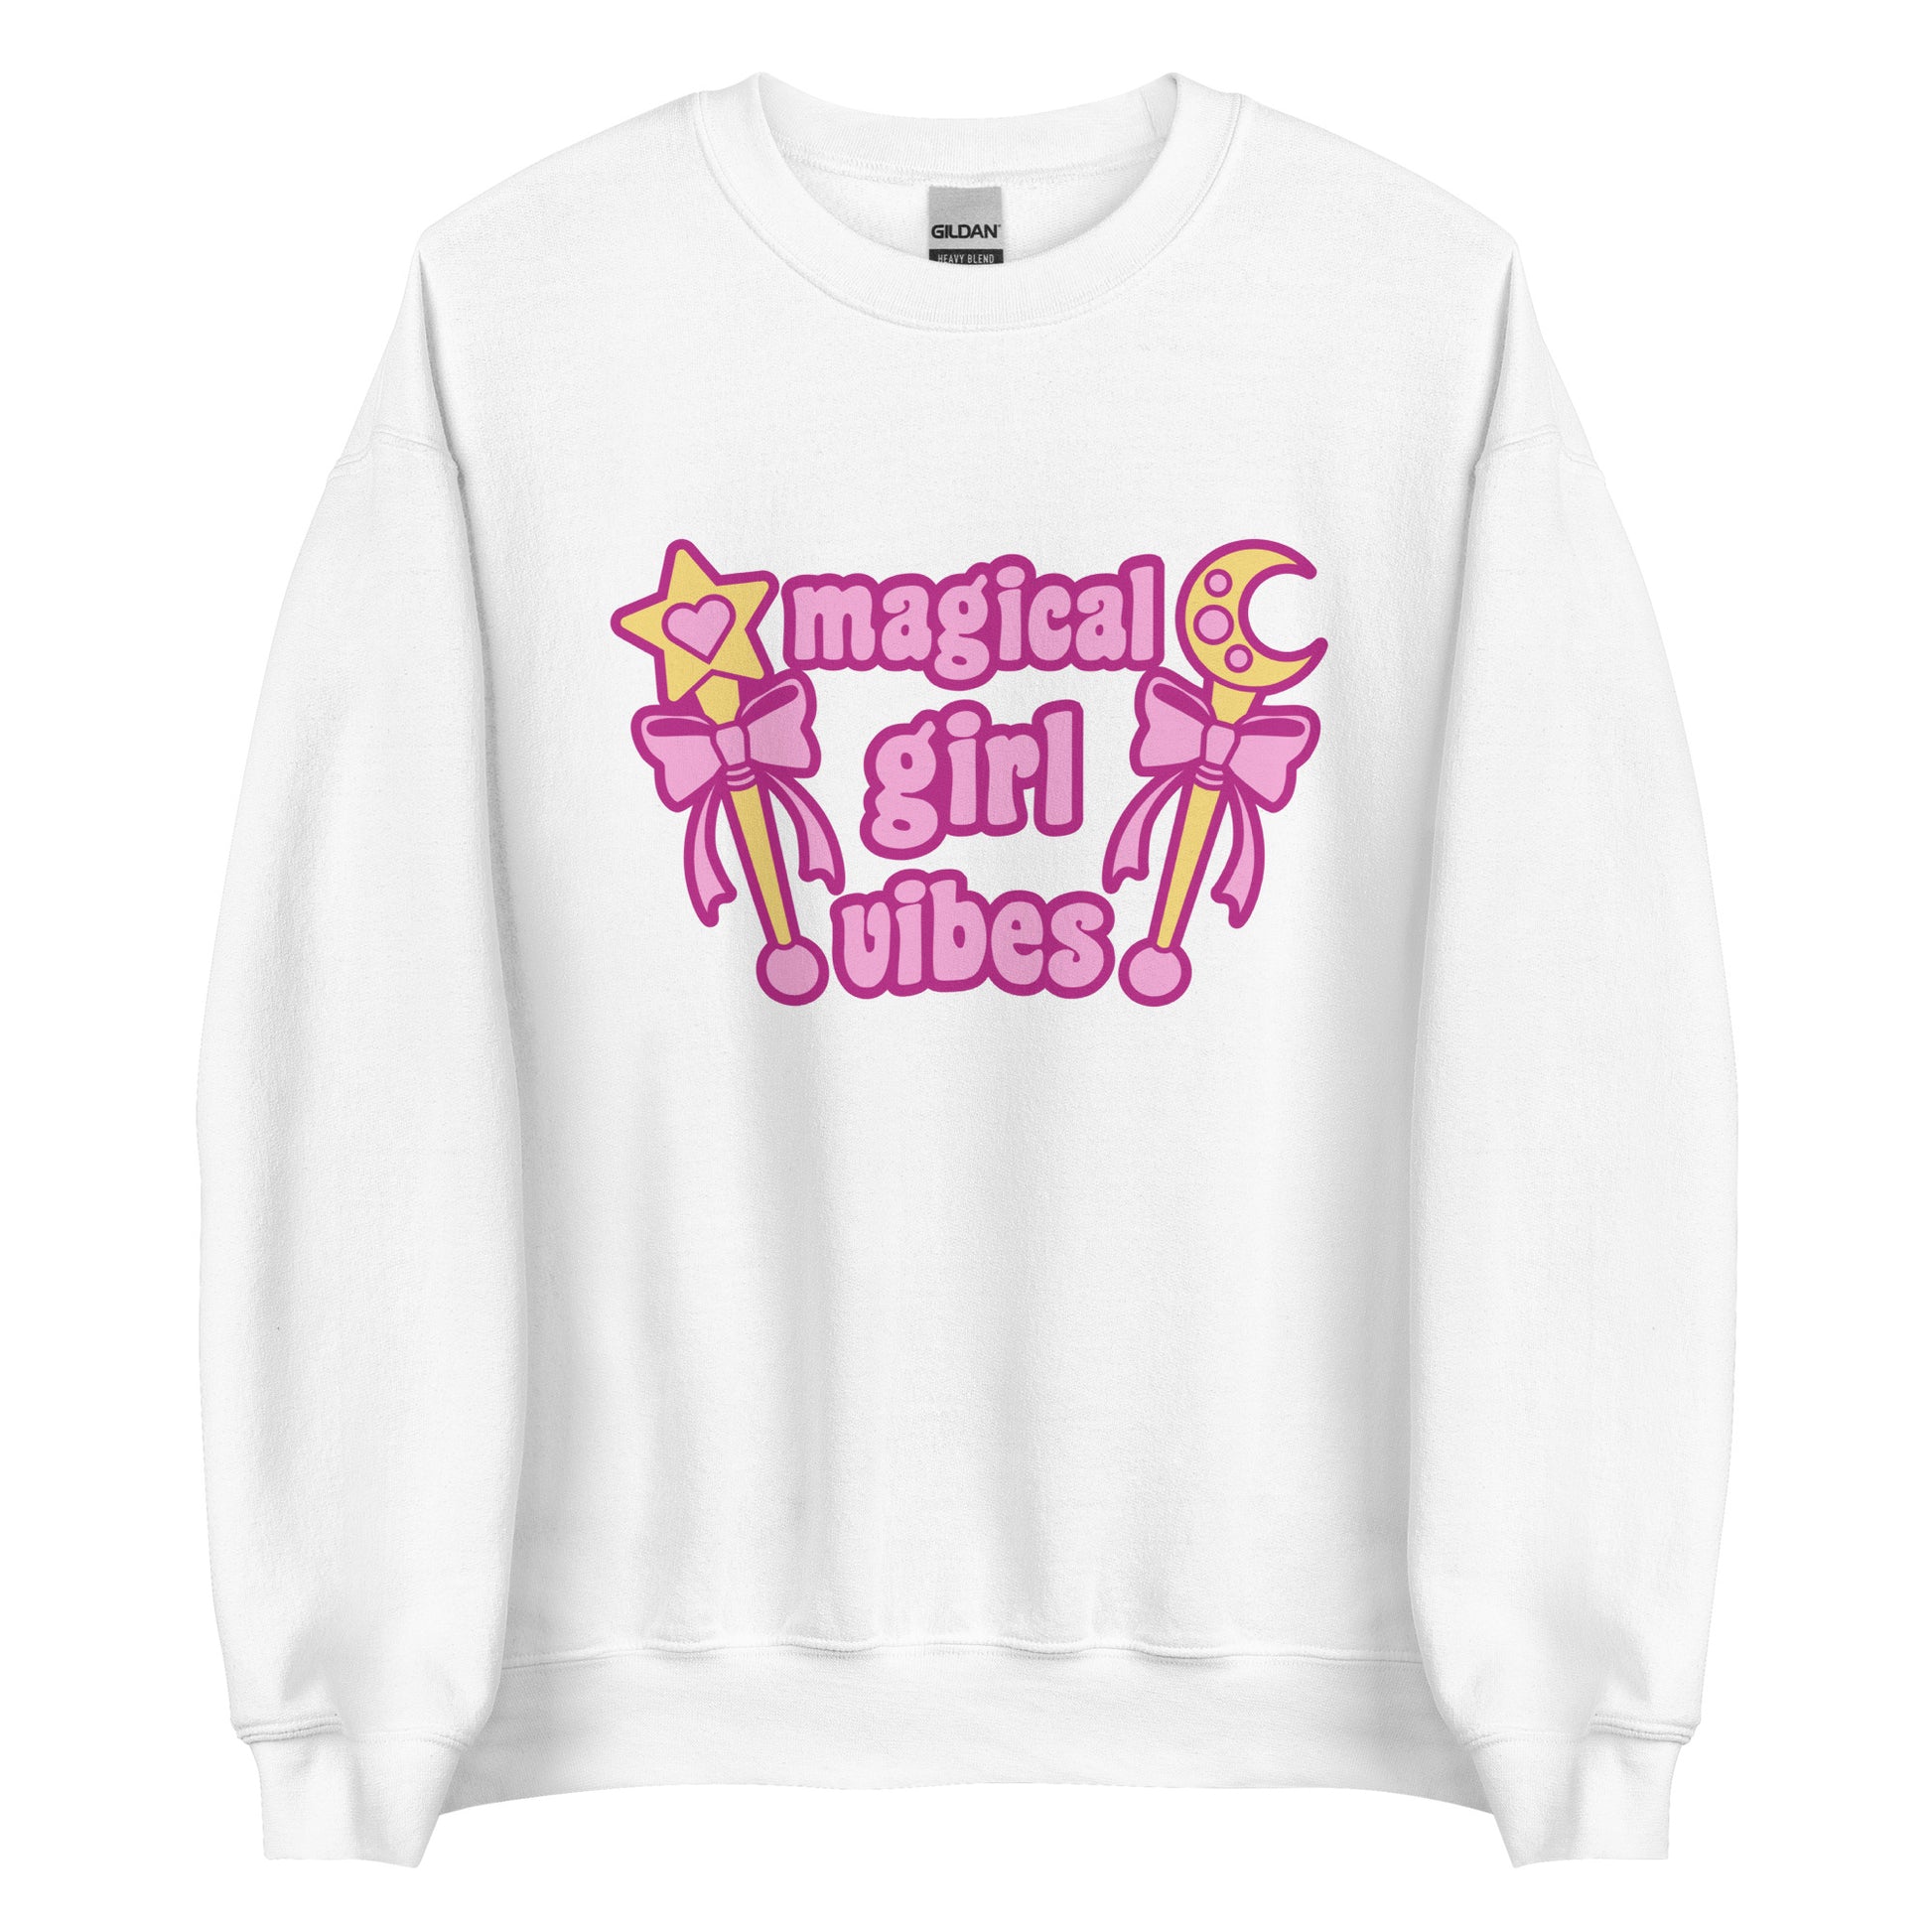 A white crewneck sweatshirt featuring two gold wands with pink bows and pink text reading "Magical girl vibes"